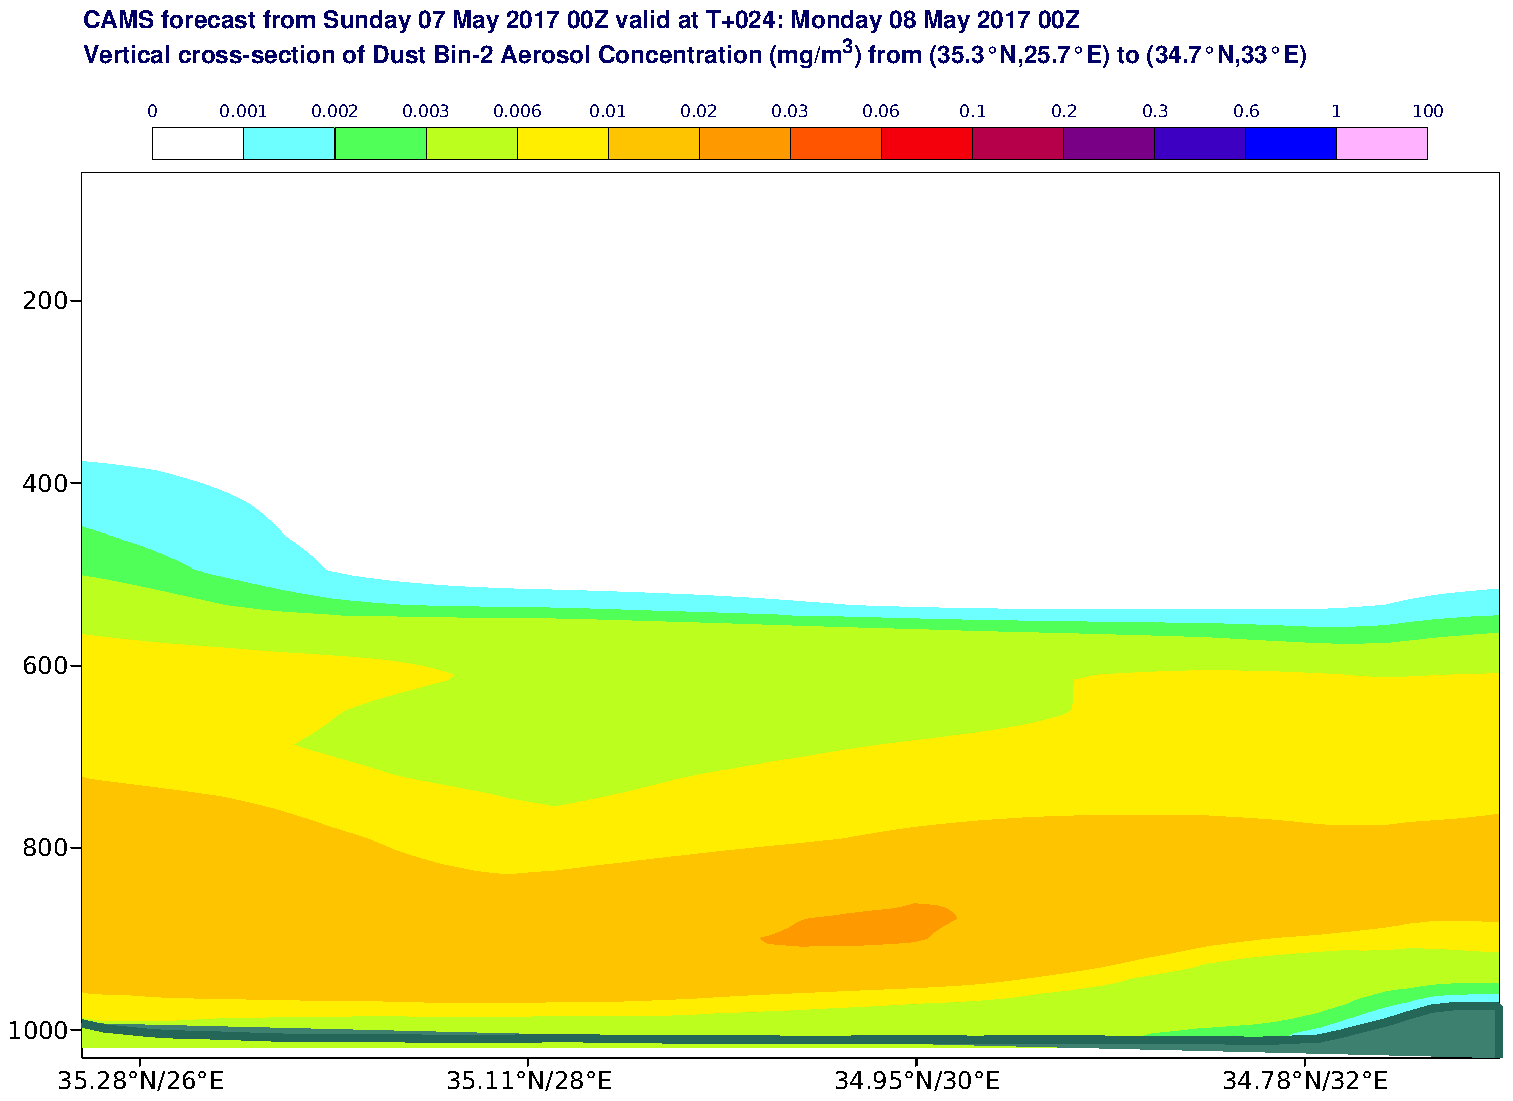 Vertical cross-section of Dust Bin-2 Aerosol Concentration (mg/m3) valid at T24 - 2017-05-08 00:00